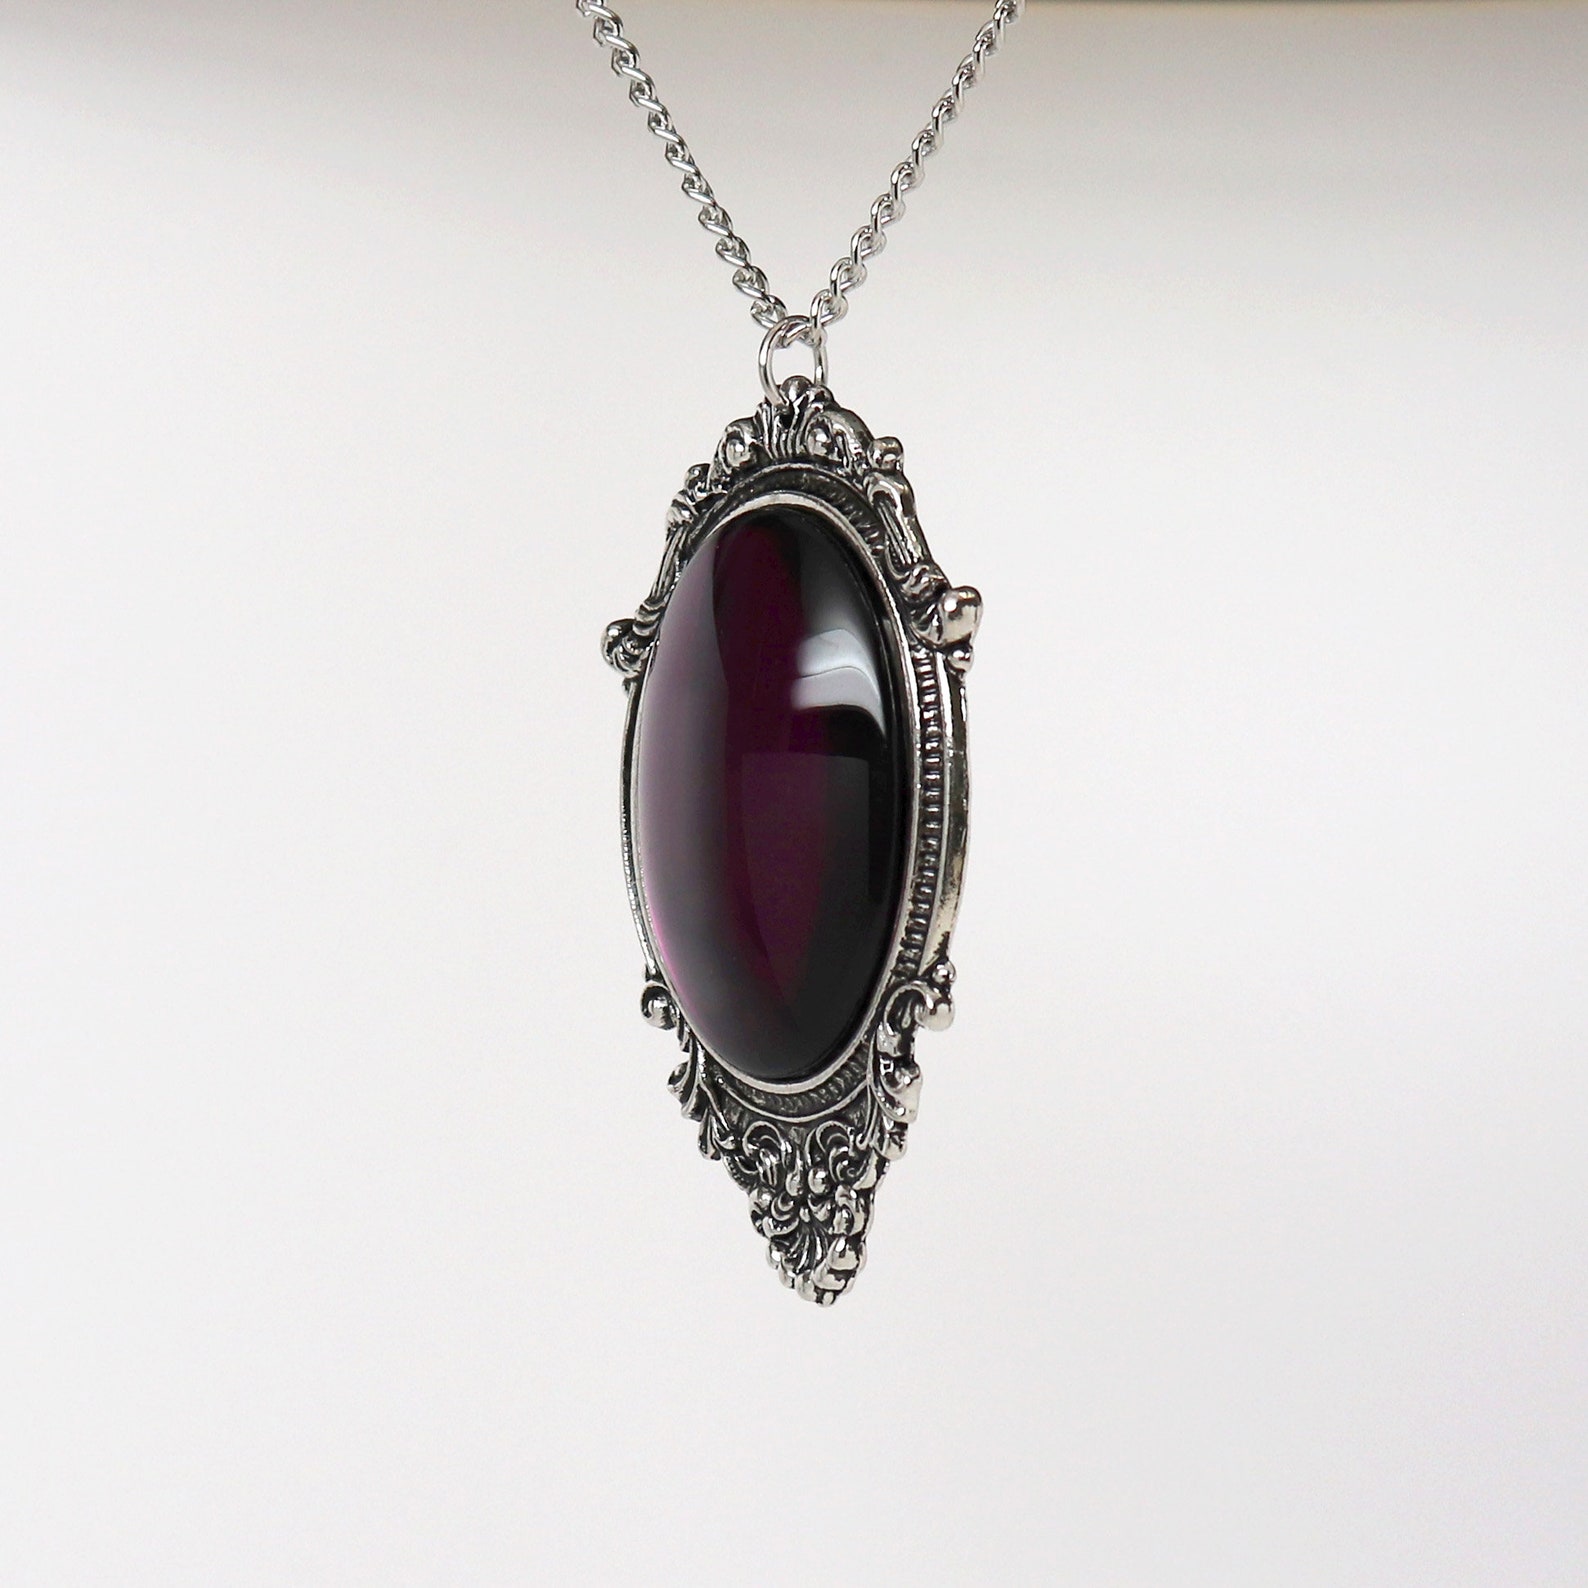 Purple Cabochon in Pewter Frame Pendant Necklace Vampire - Etsy